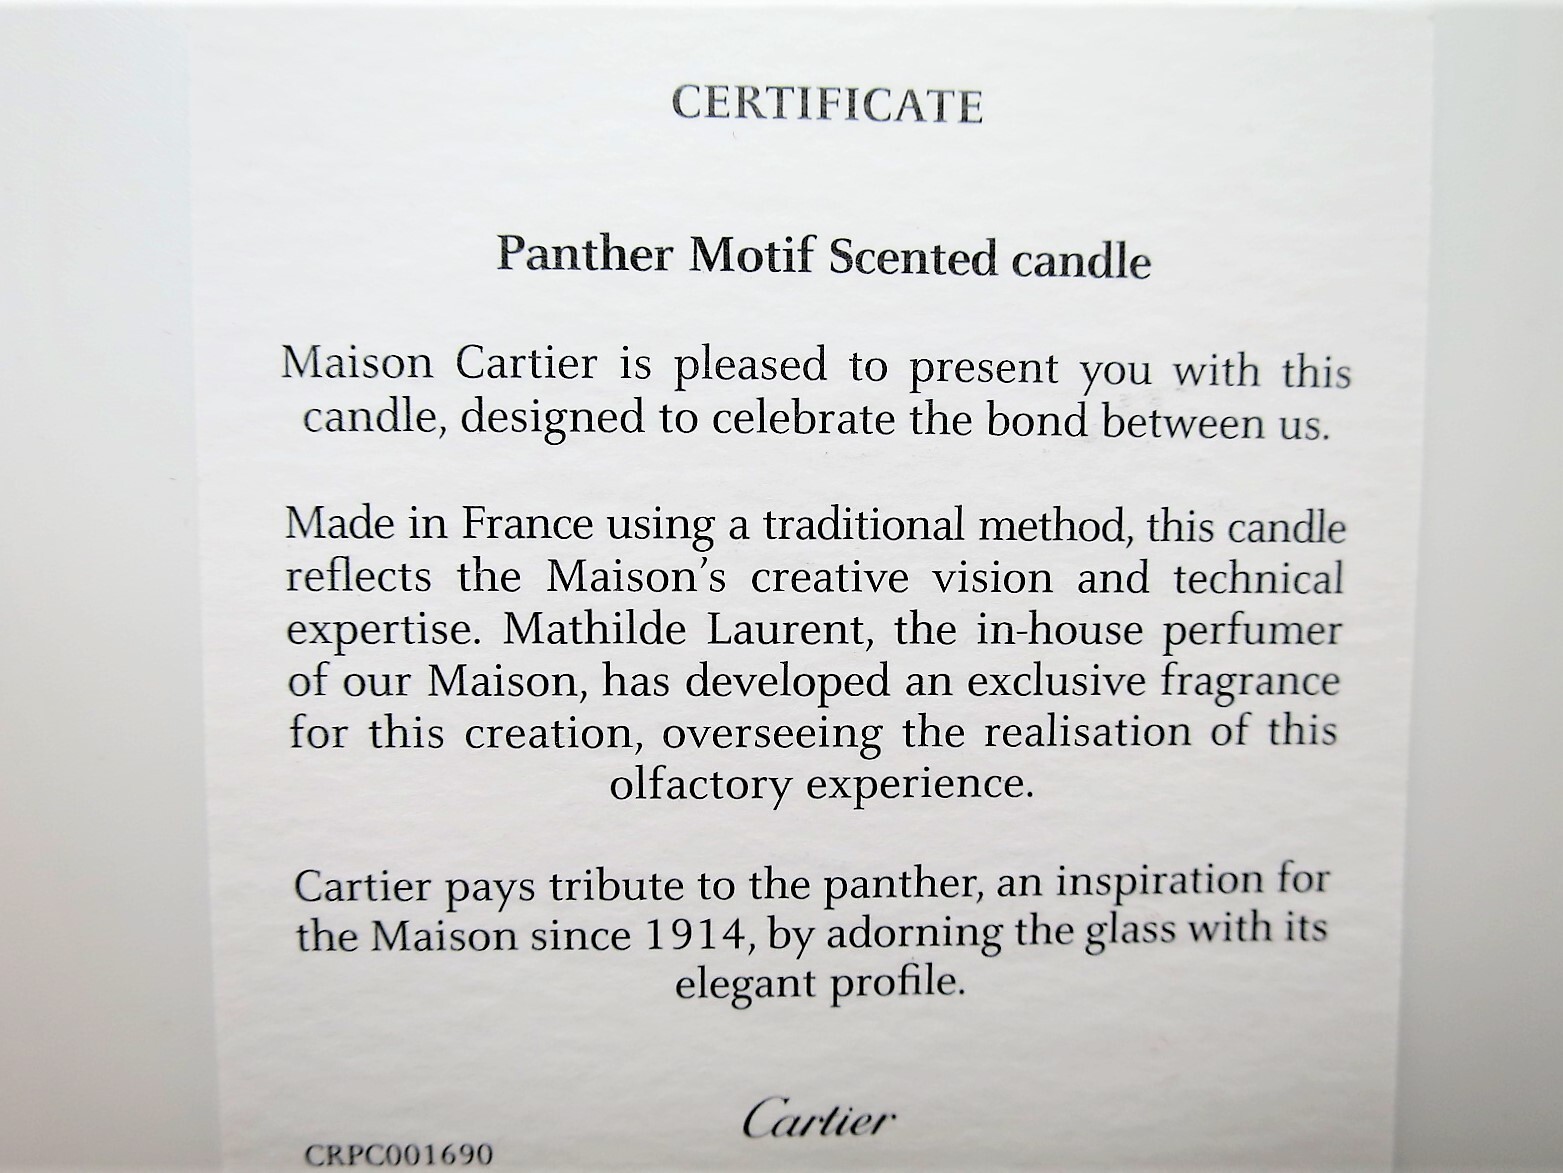 New CARTIER aroma Candle Red Panthere Motif Scented Candle boxed